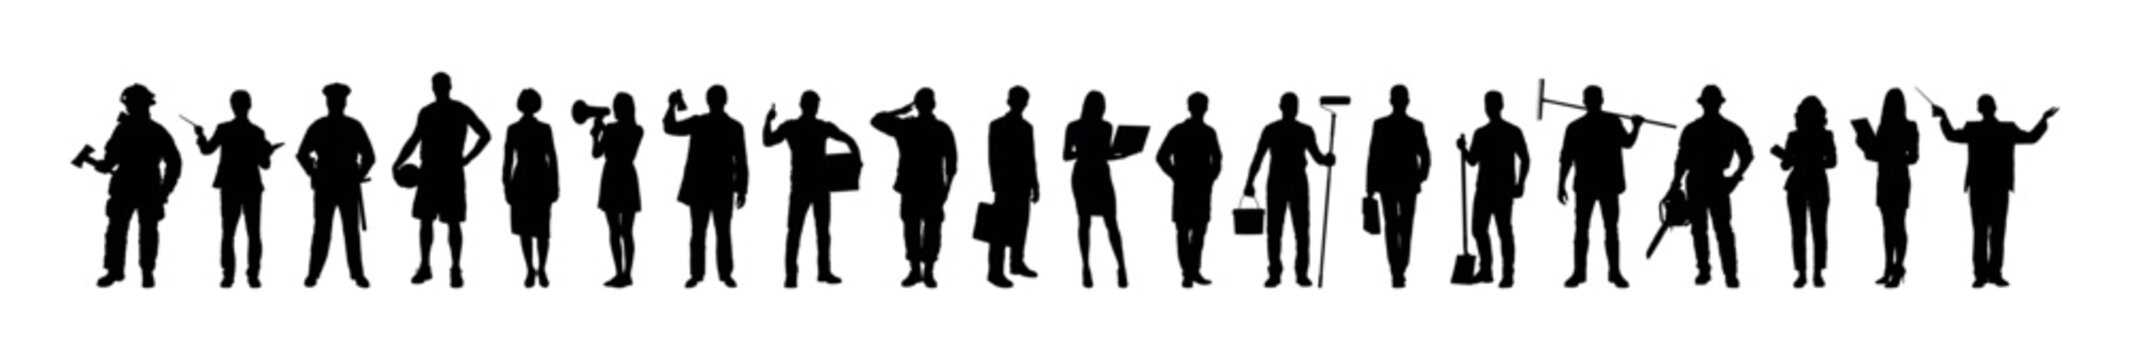 People with various professions standing together in row vector black silhouettes set collection.